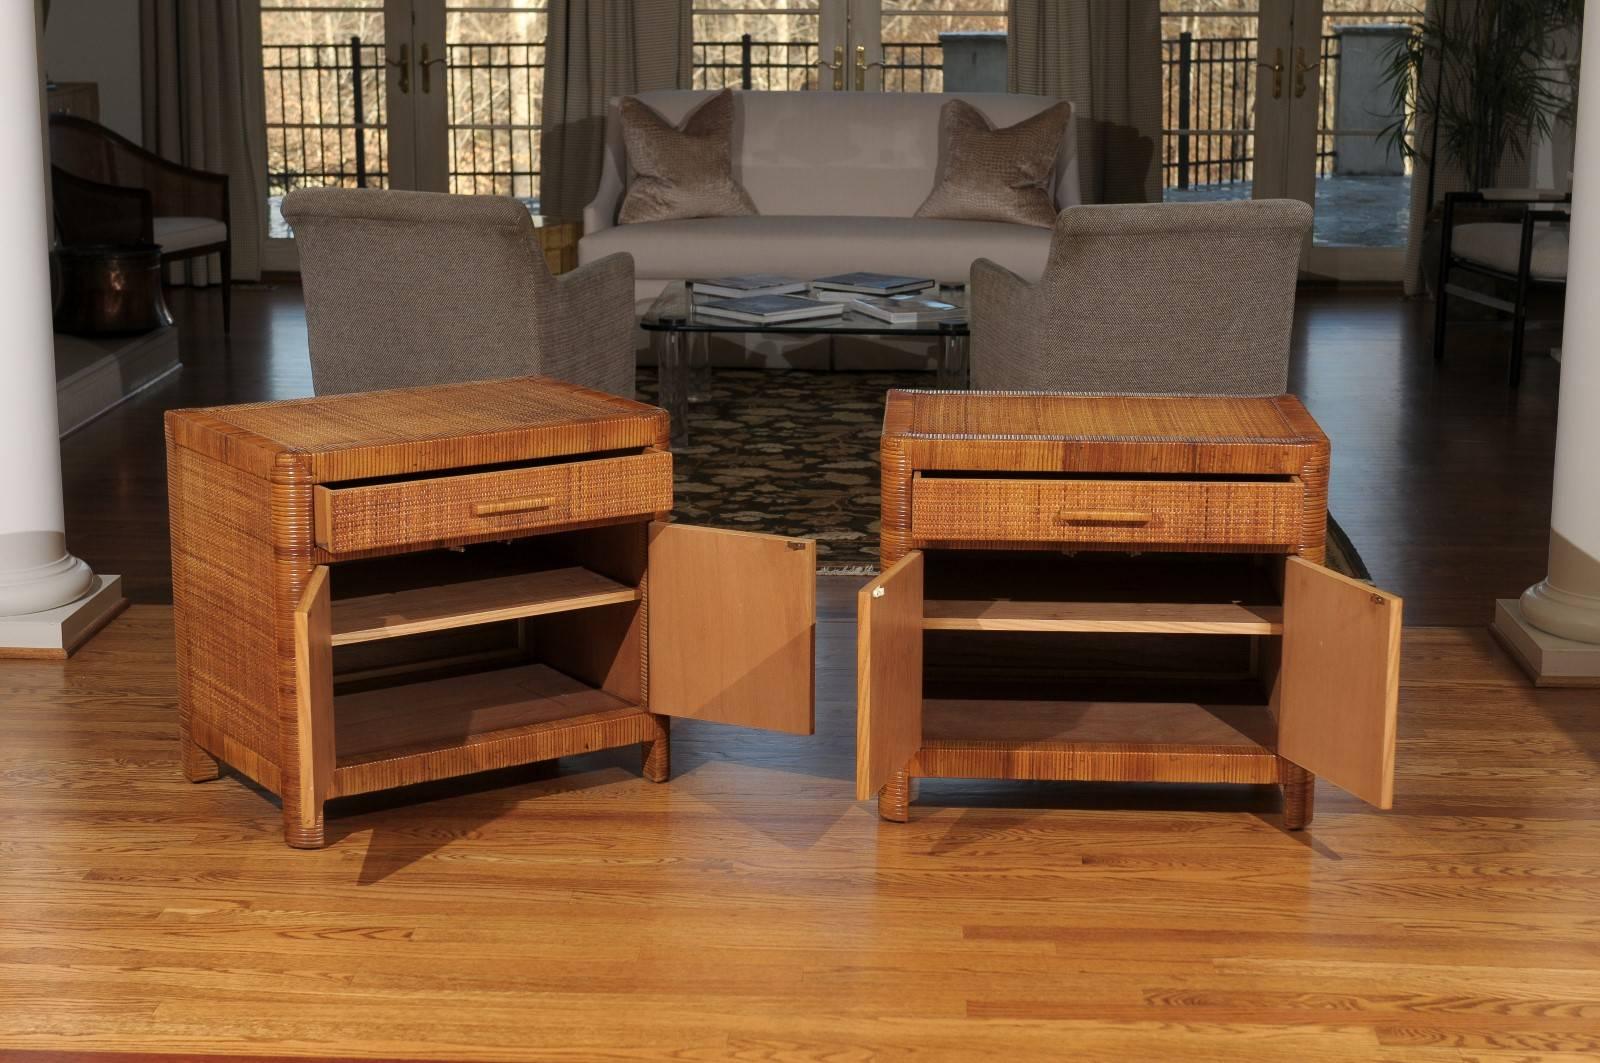 Late 20th Century Beautiful Restored Pair of Vintage Cane Cabinets by Bielecky Brothers